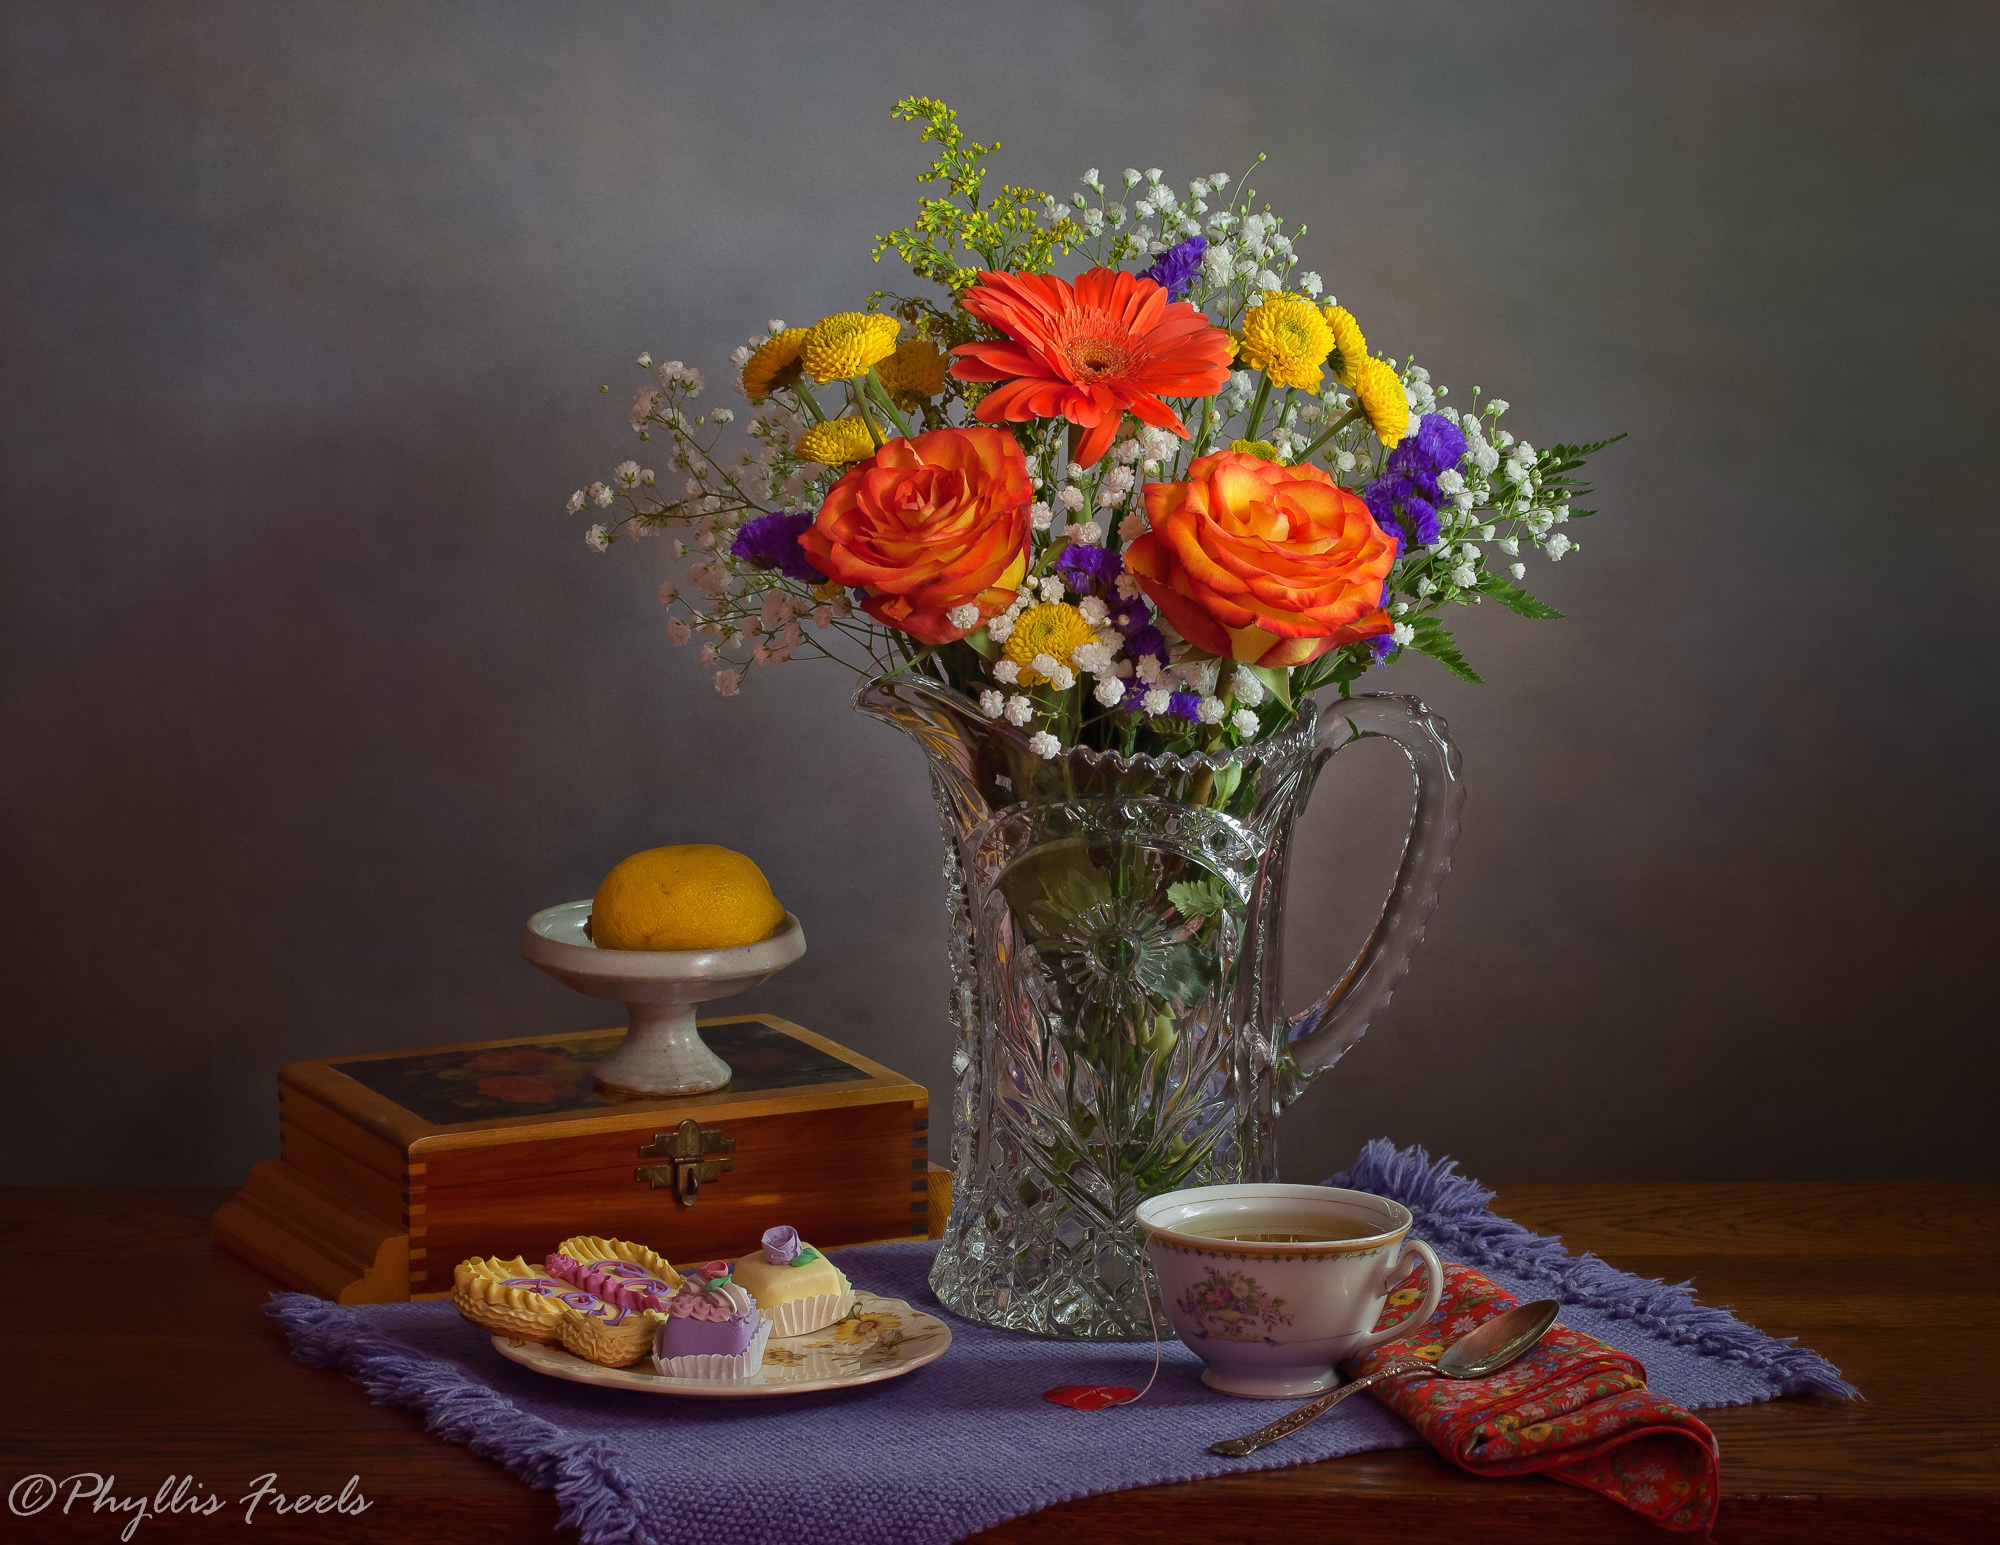 General 2000x1545 flowers cup plants colorful still life